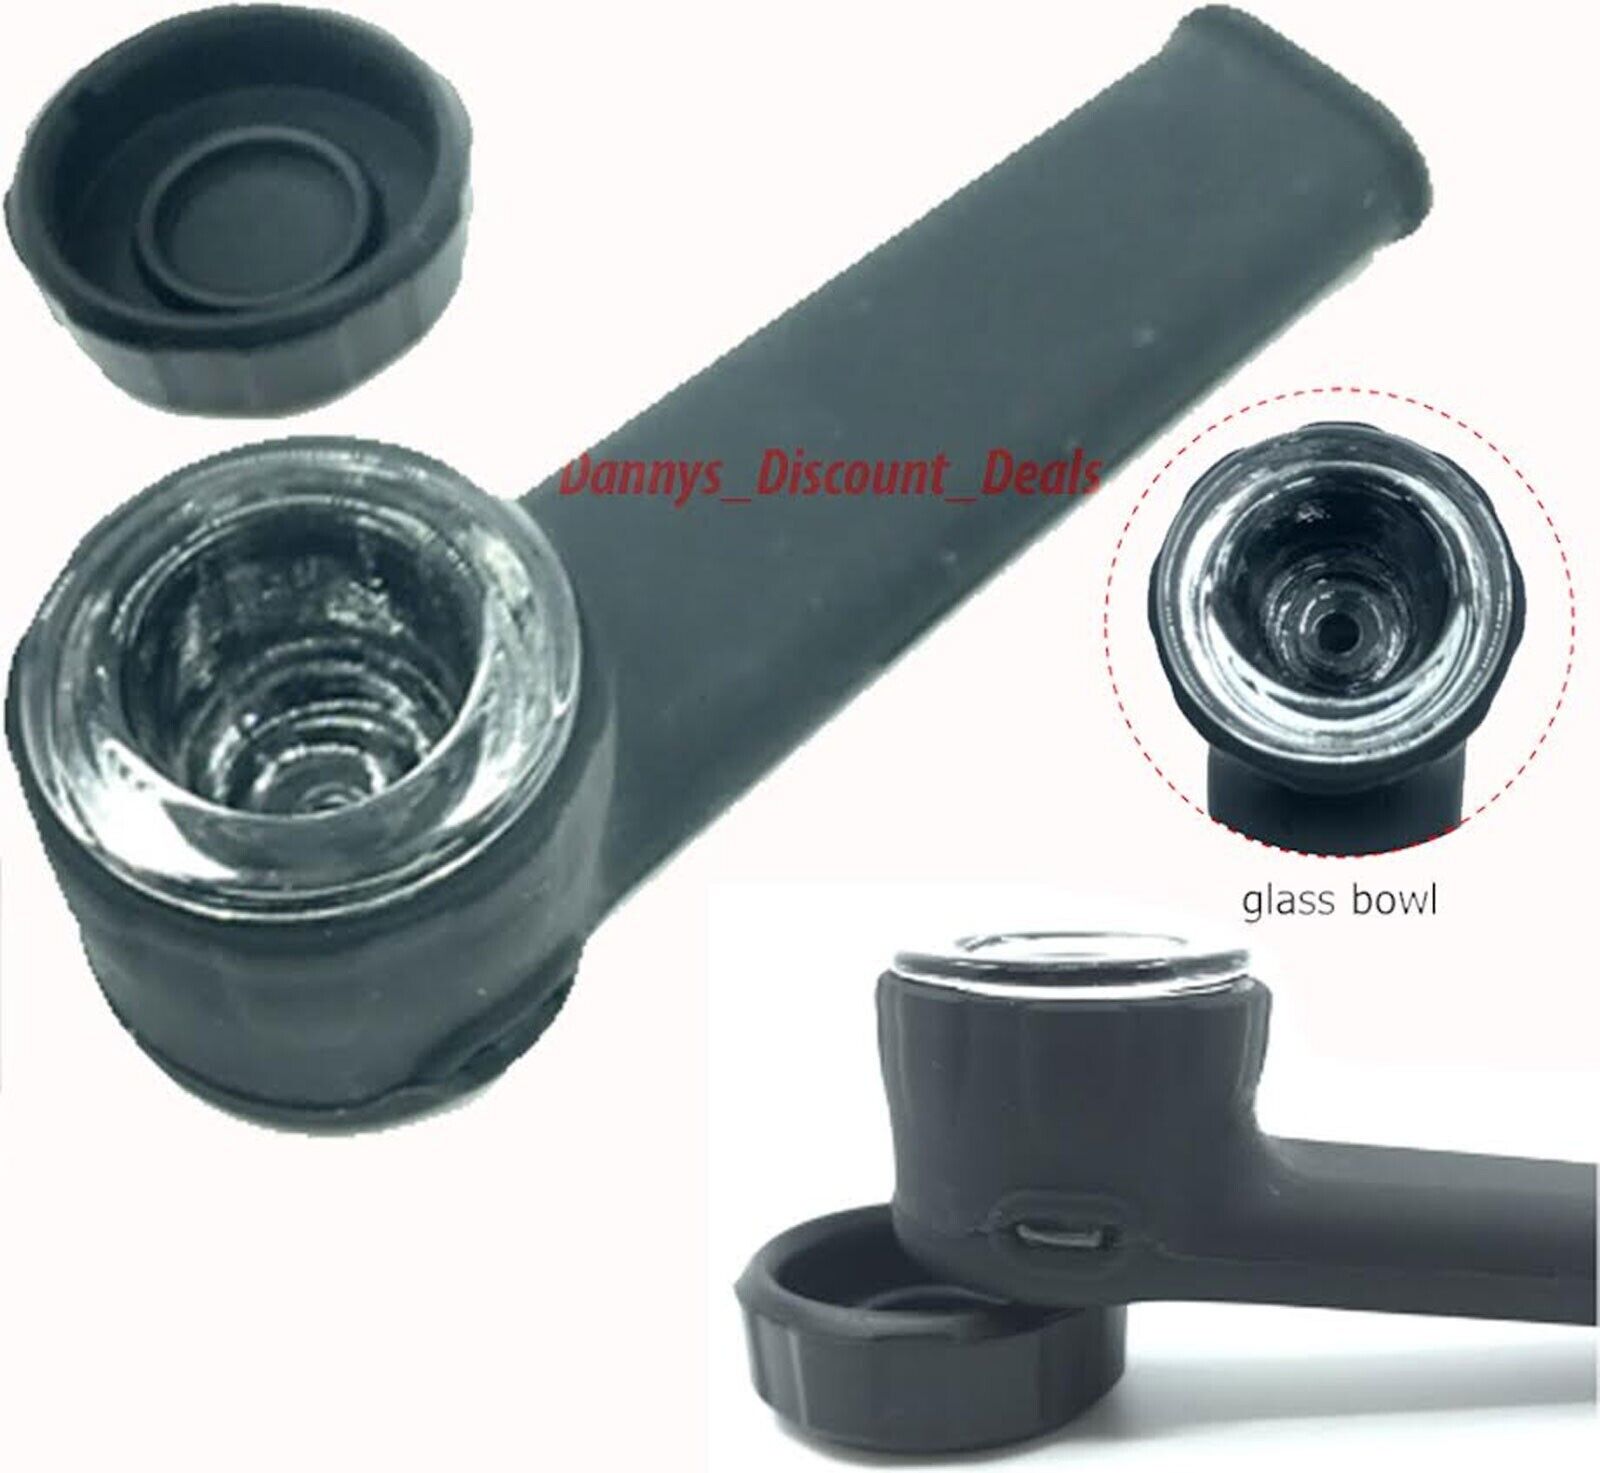 Silicone PIPE Flexible Handheld Tobacco Smoking with Glass Bowl & Cap Lid Black